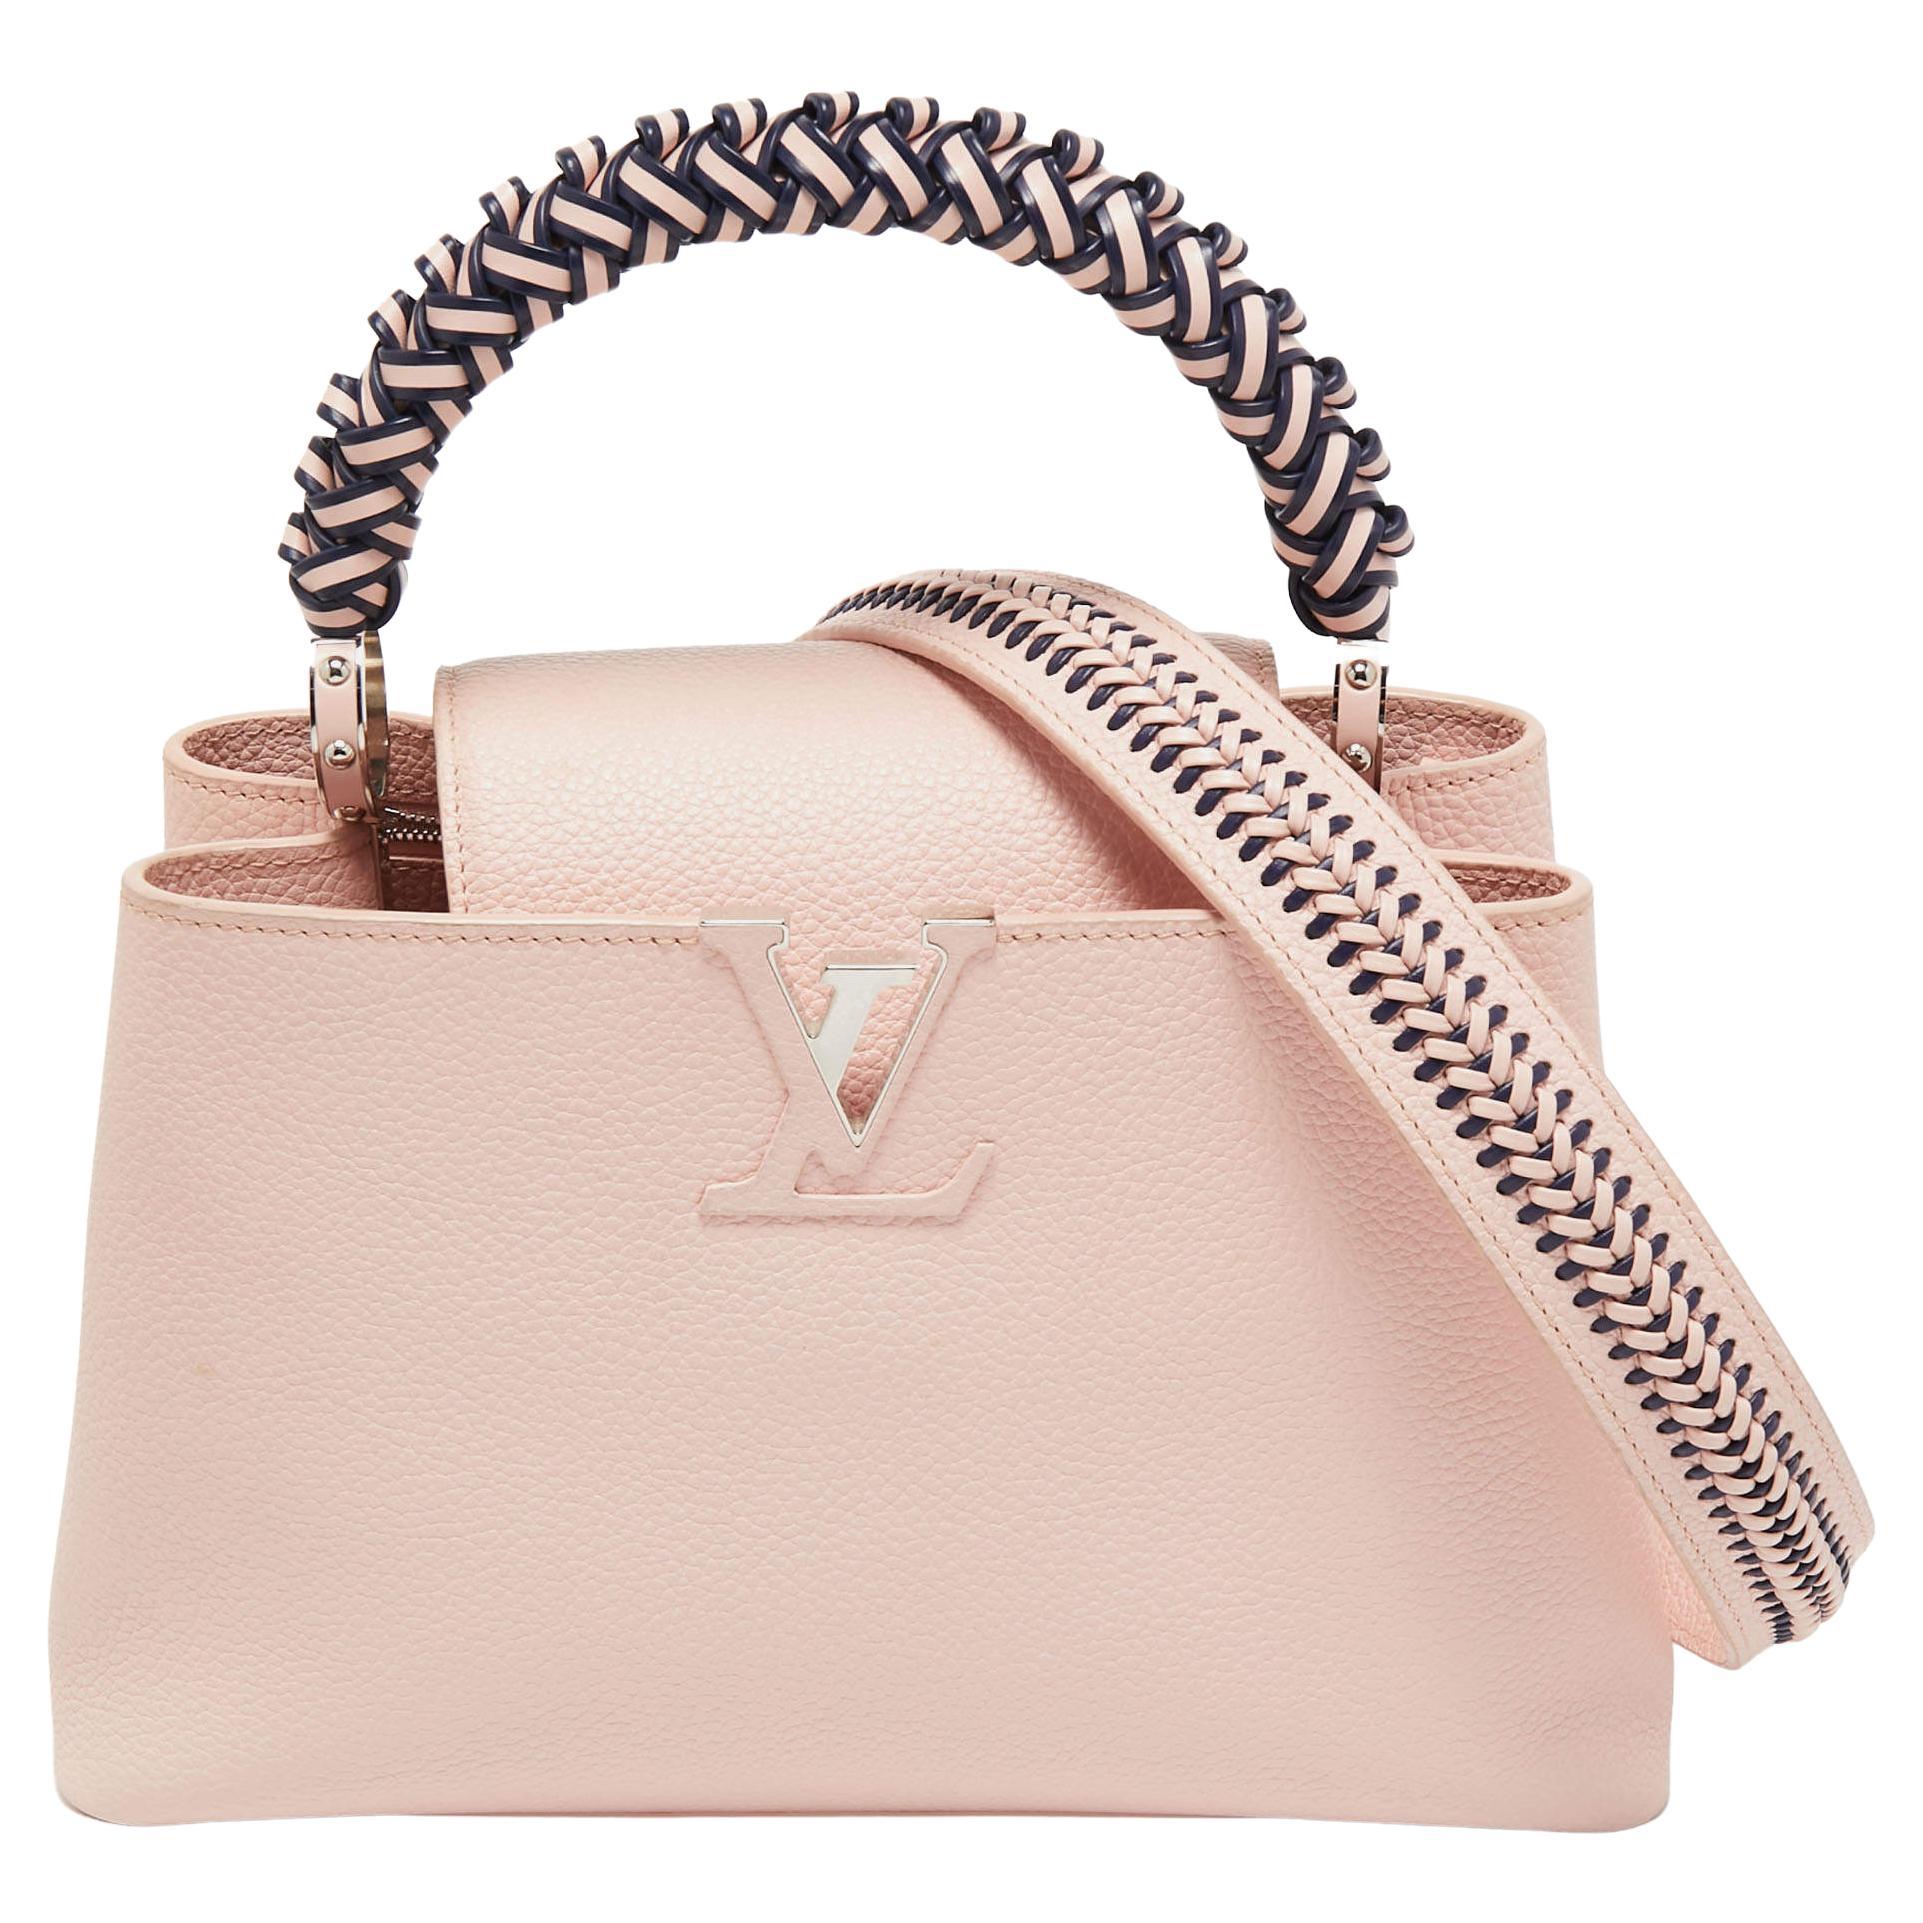 Louis Vuitton, Bags, Louis Vuitton Bucket Bag Refurbished And Customized  Authentic Barbiecore